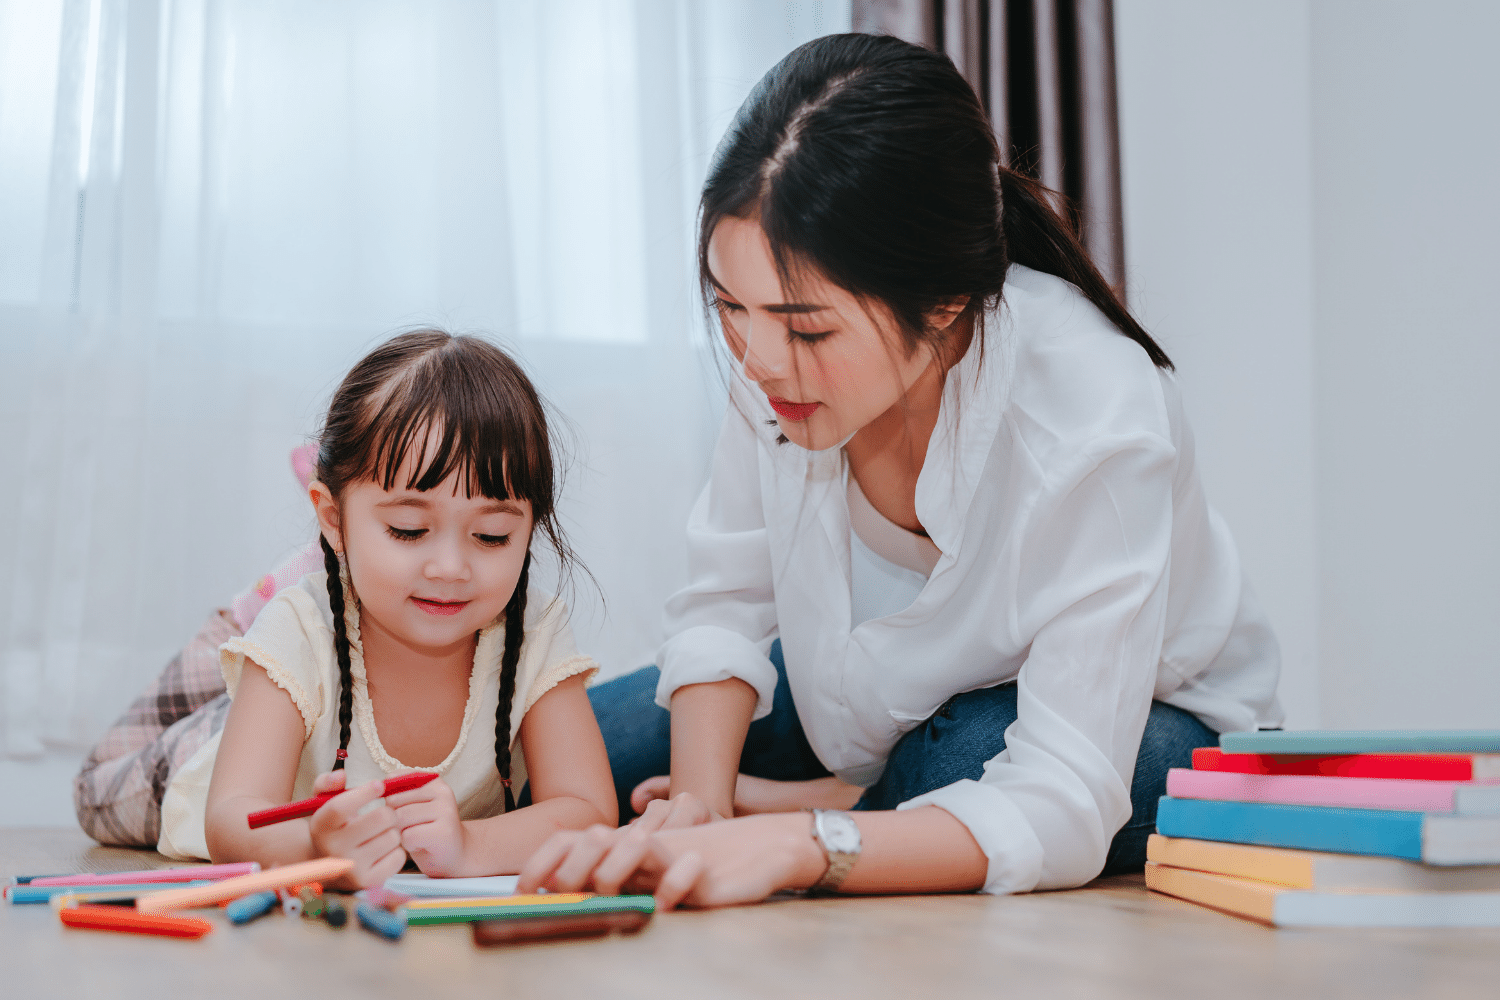 When Should I Teach My Child Sight Words?